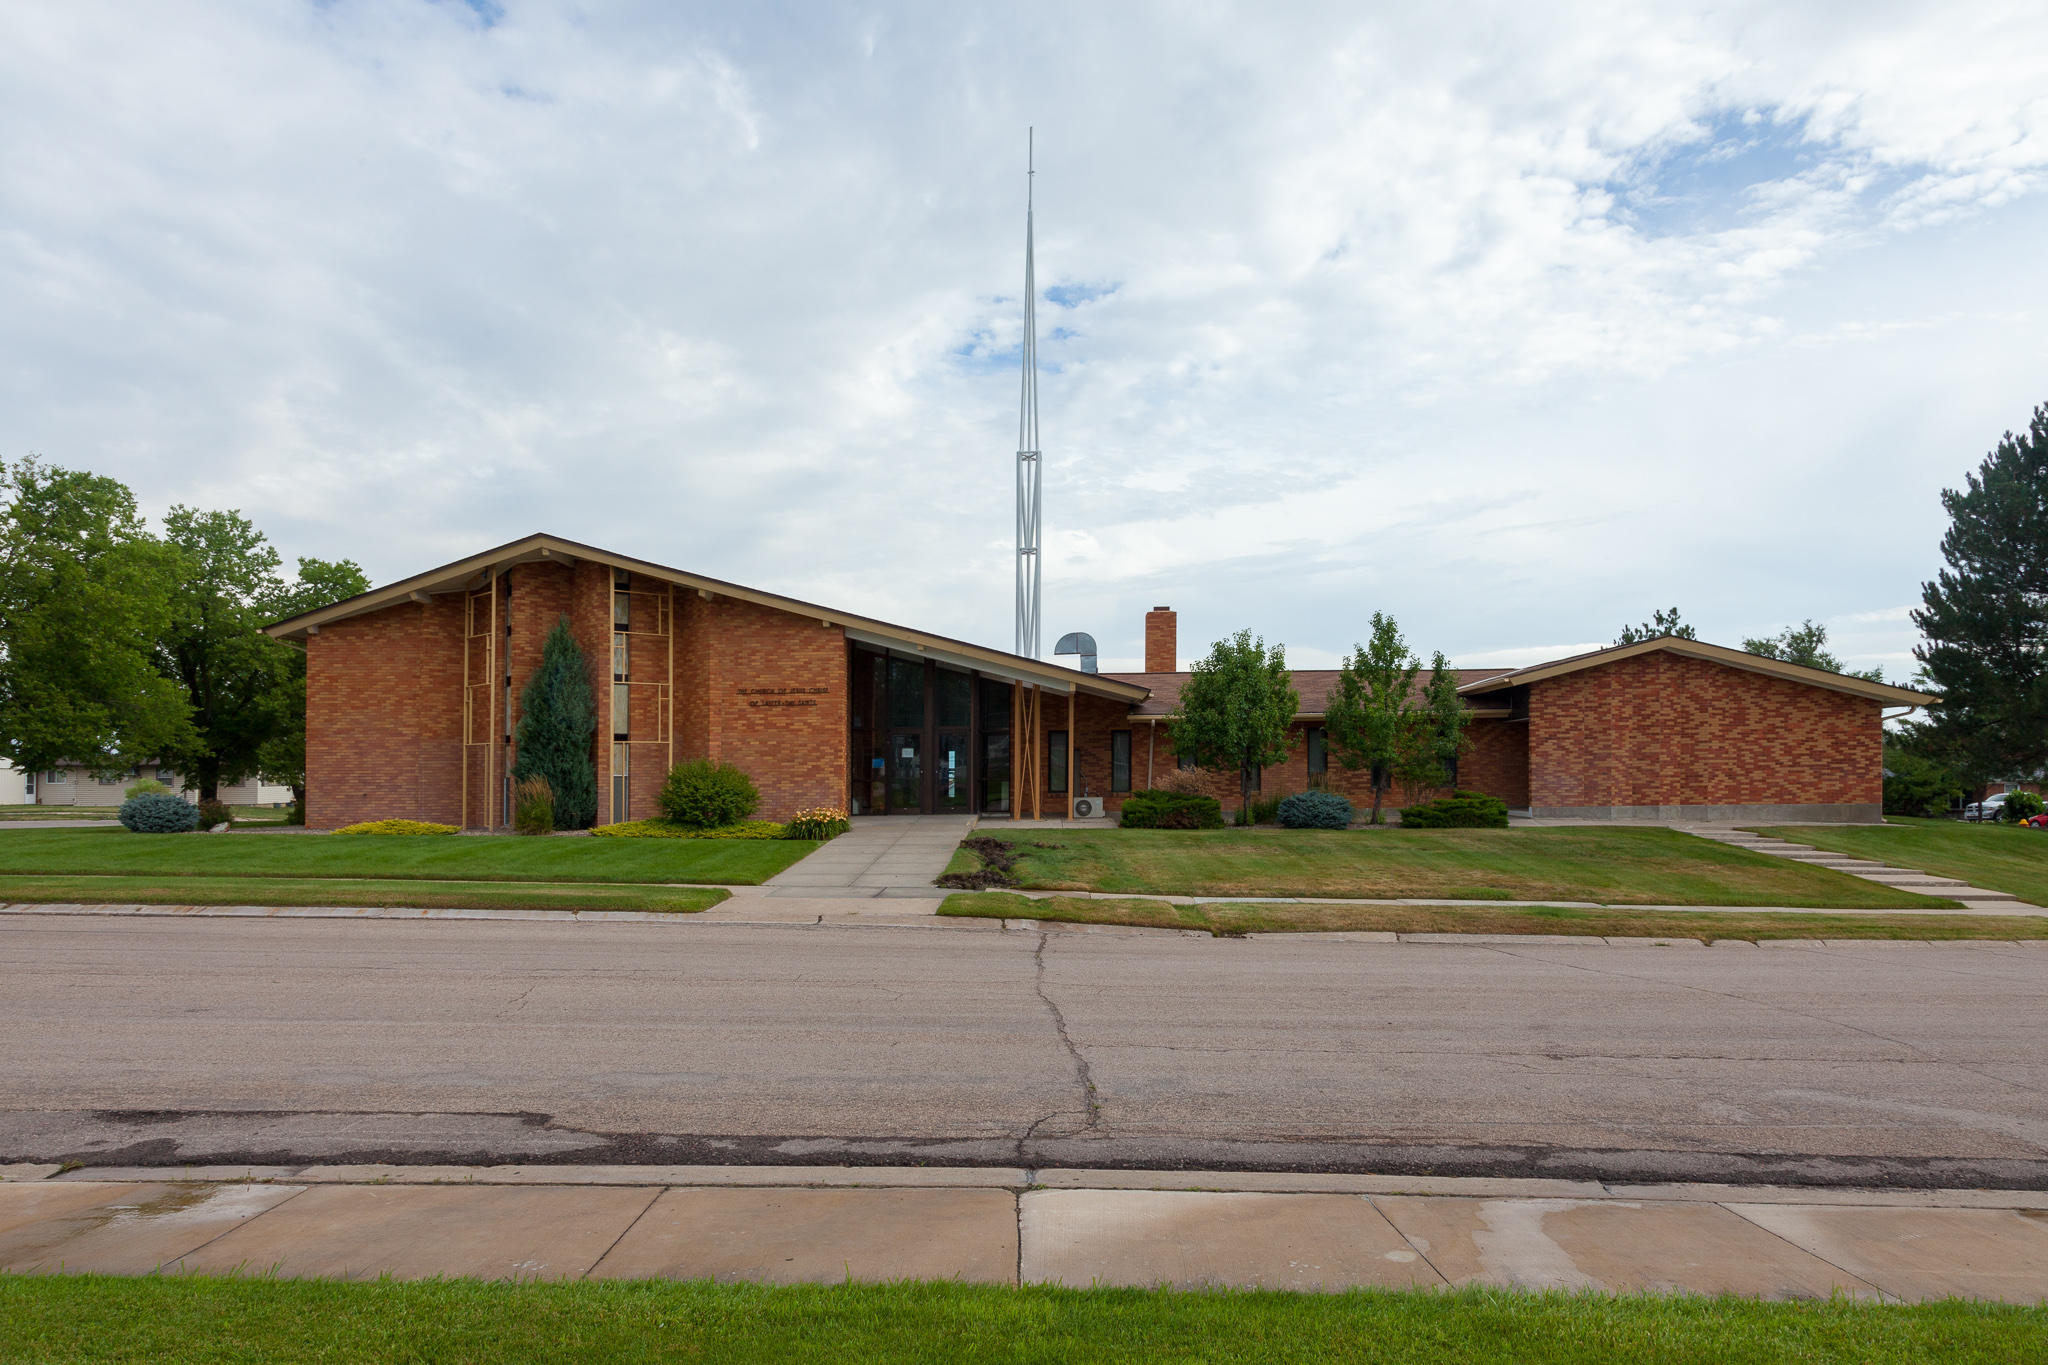 The Church of Jesus Christ of Latter-day Saints, Belle Fourche SD 57717-2143